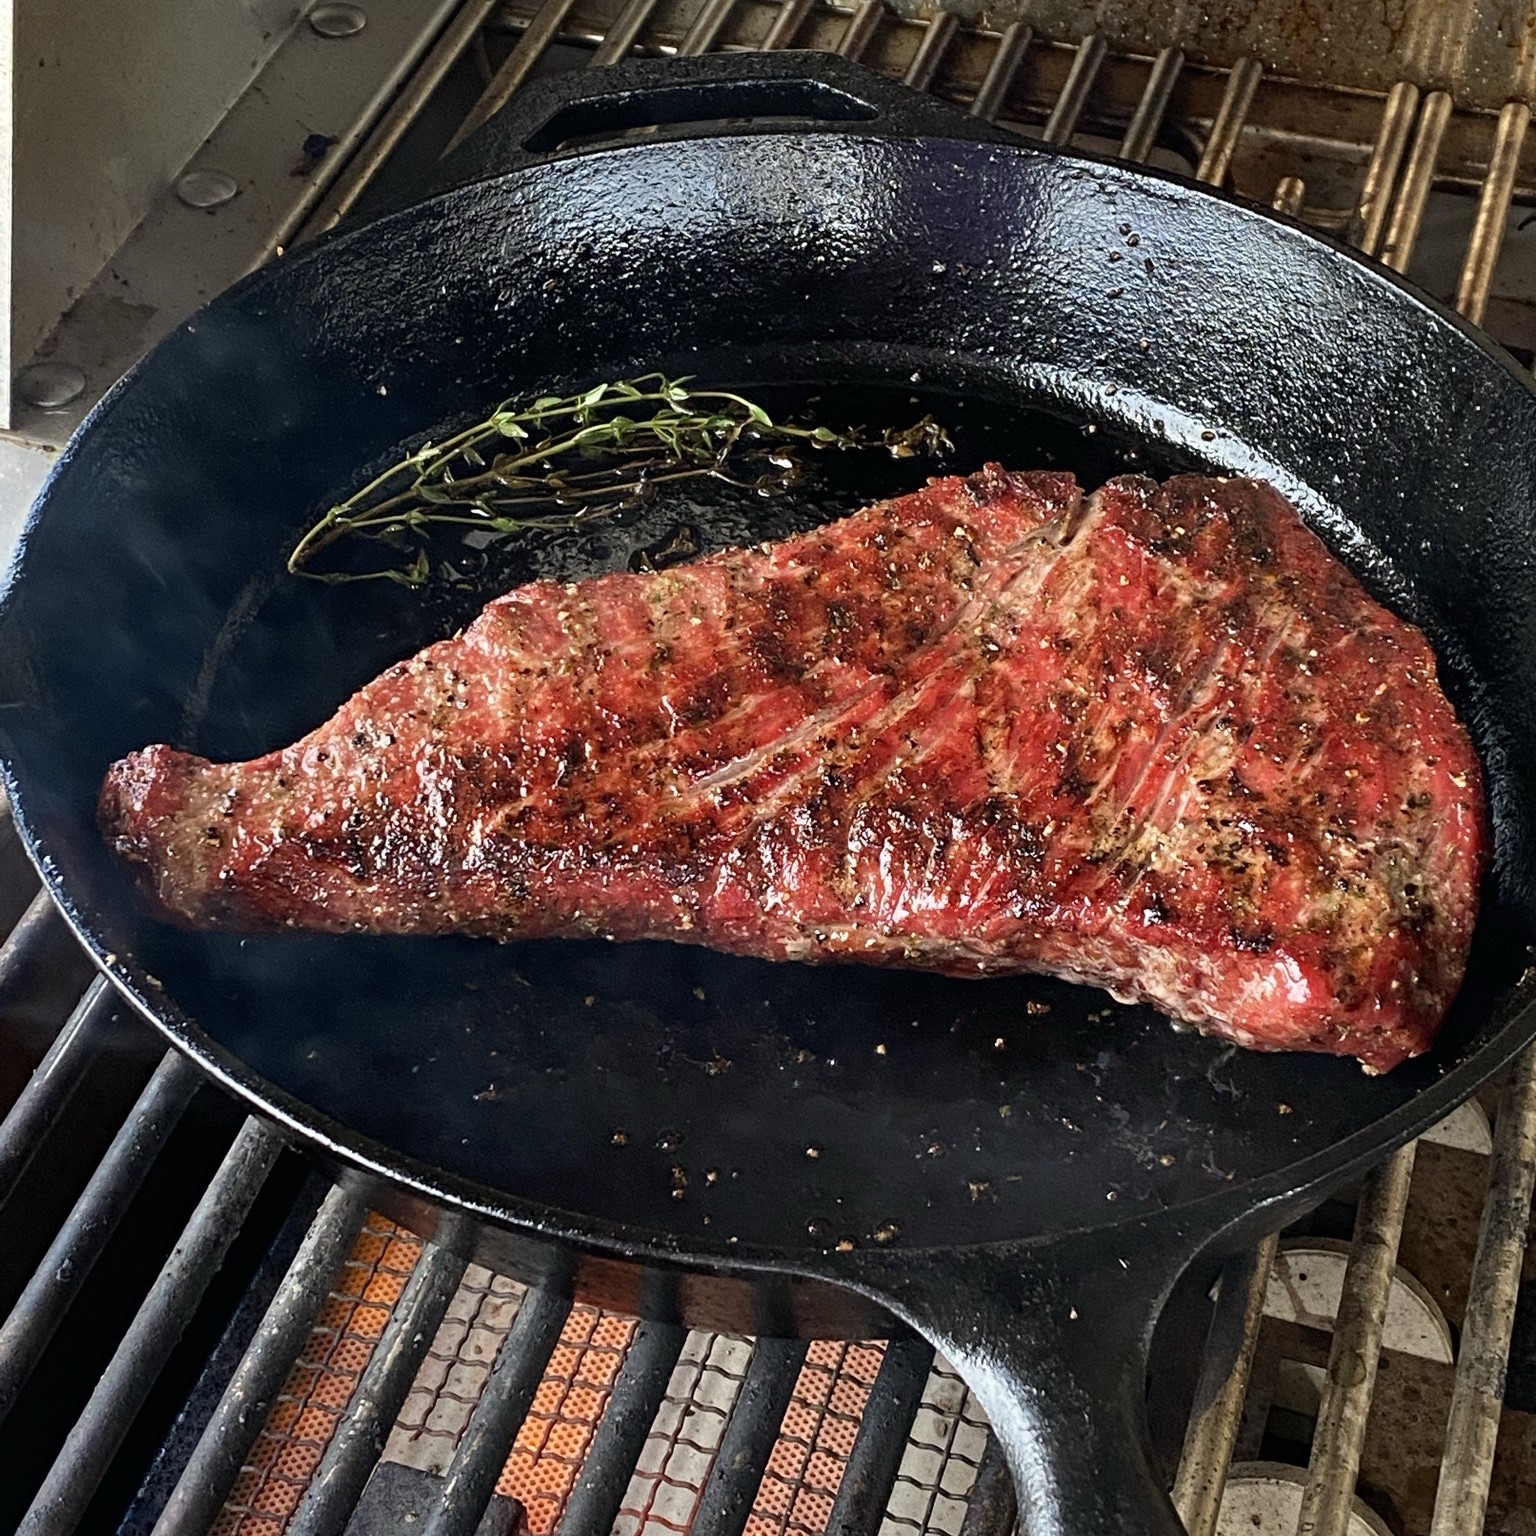 Tri tip getting seared in cast iron skillet with rosemary on the grill.